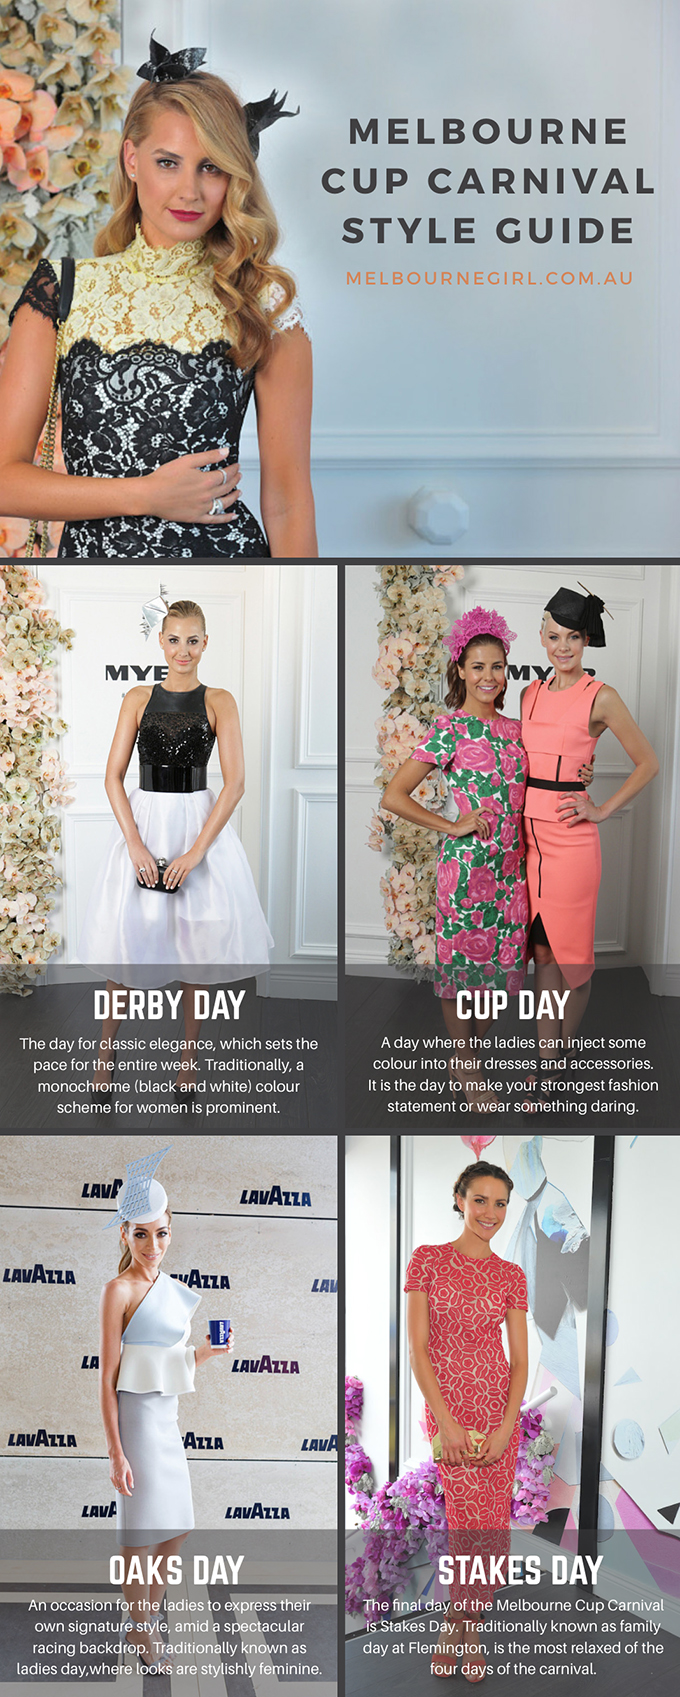 MELBOURNE CUP CARNIVAL - STYLE GUIDE